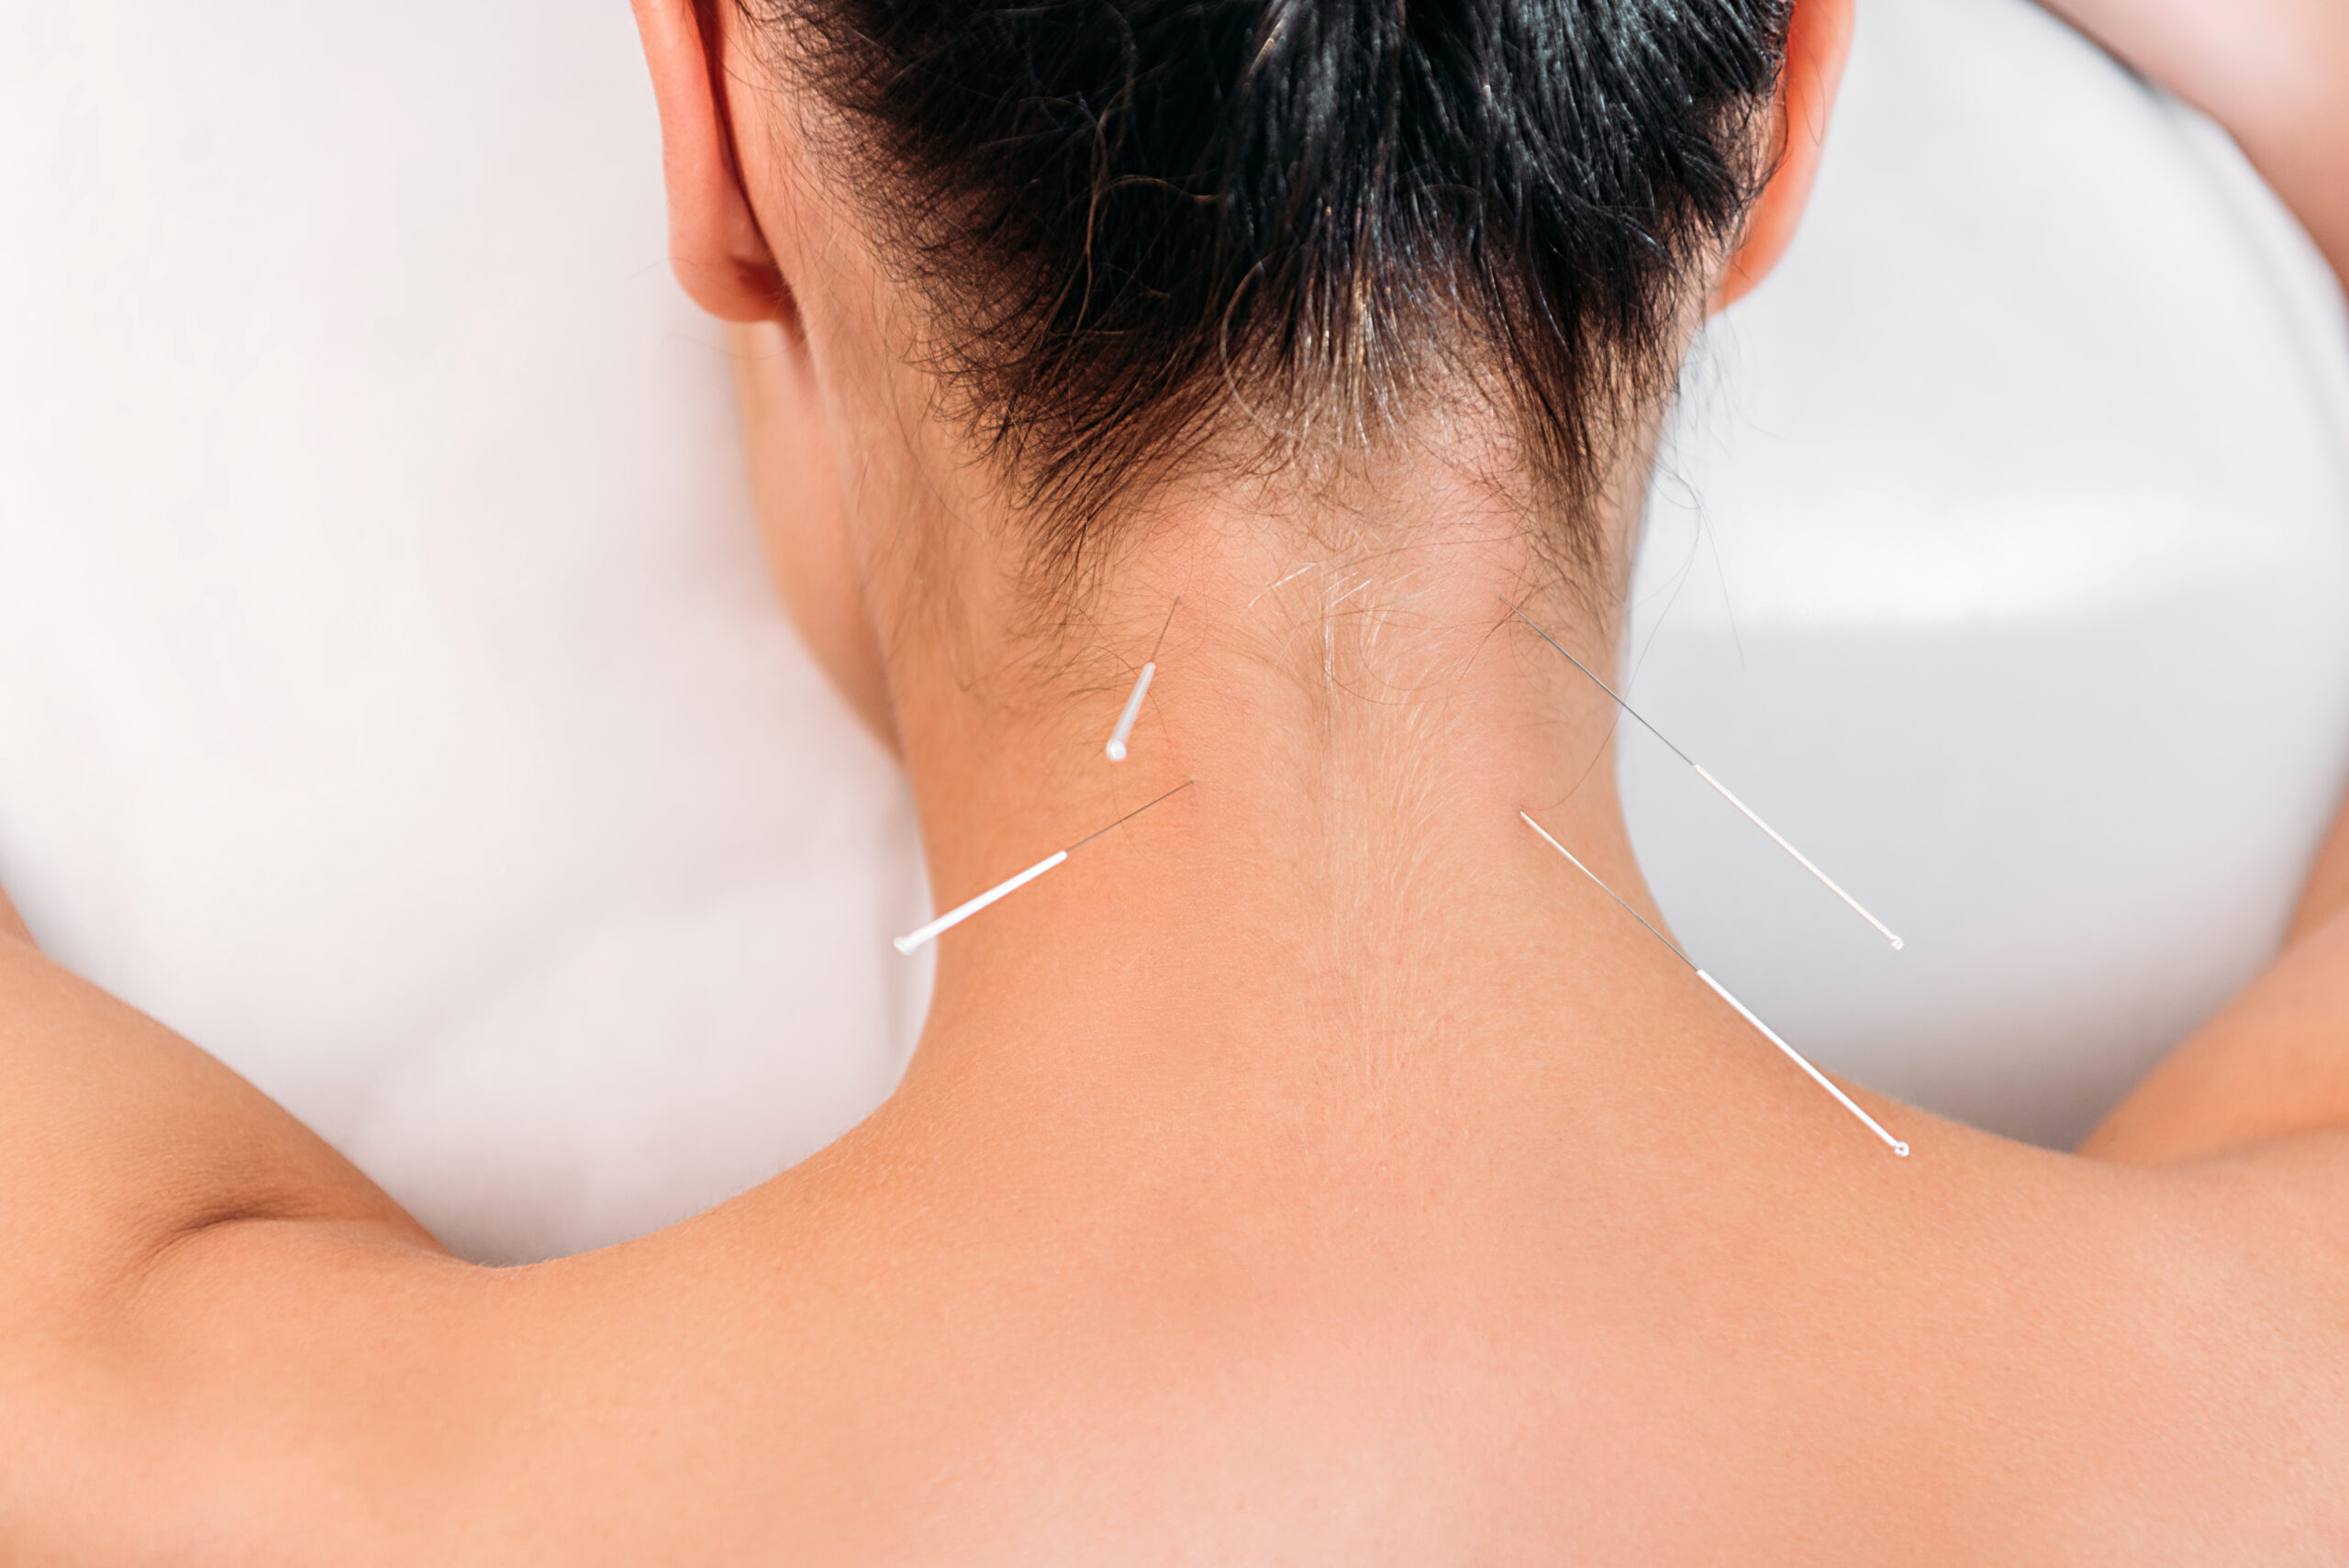 https://elements.envato.com/partial-view-of-woman-having-acupuncture-therapy-i-XZVC4C9